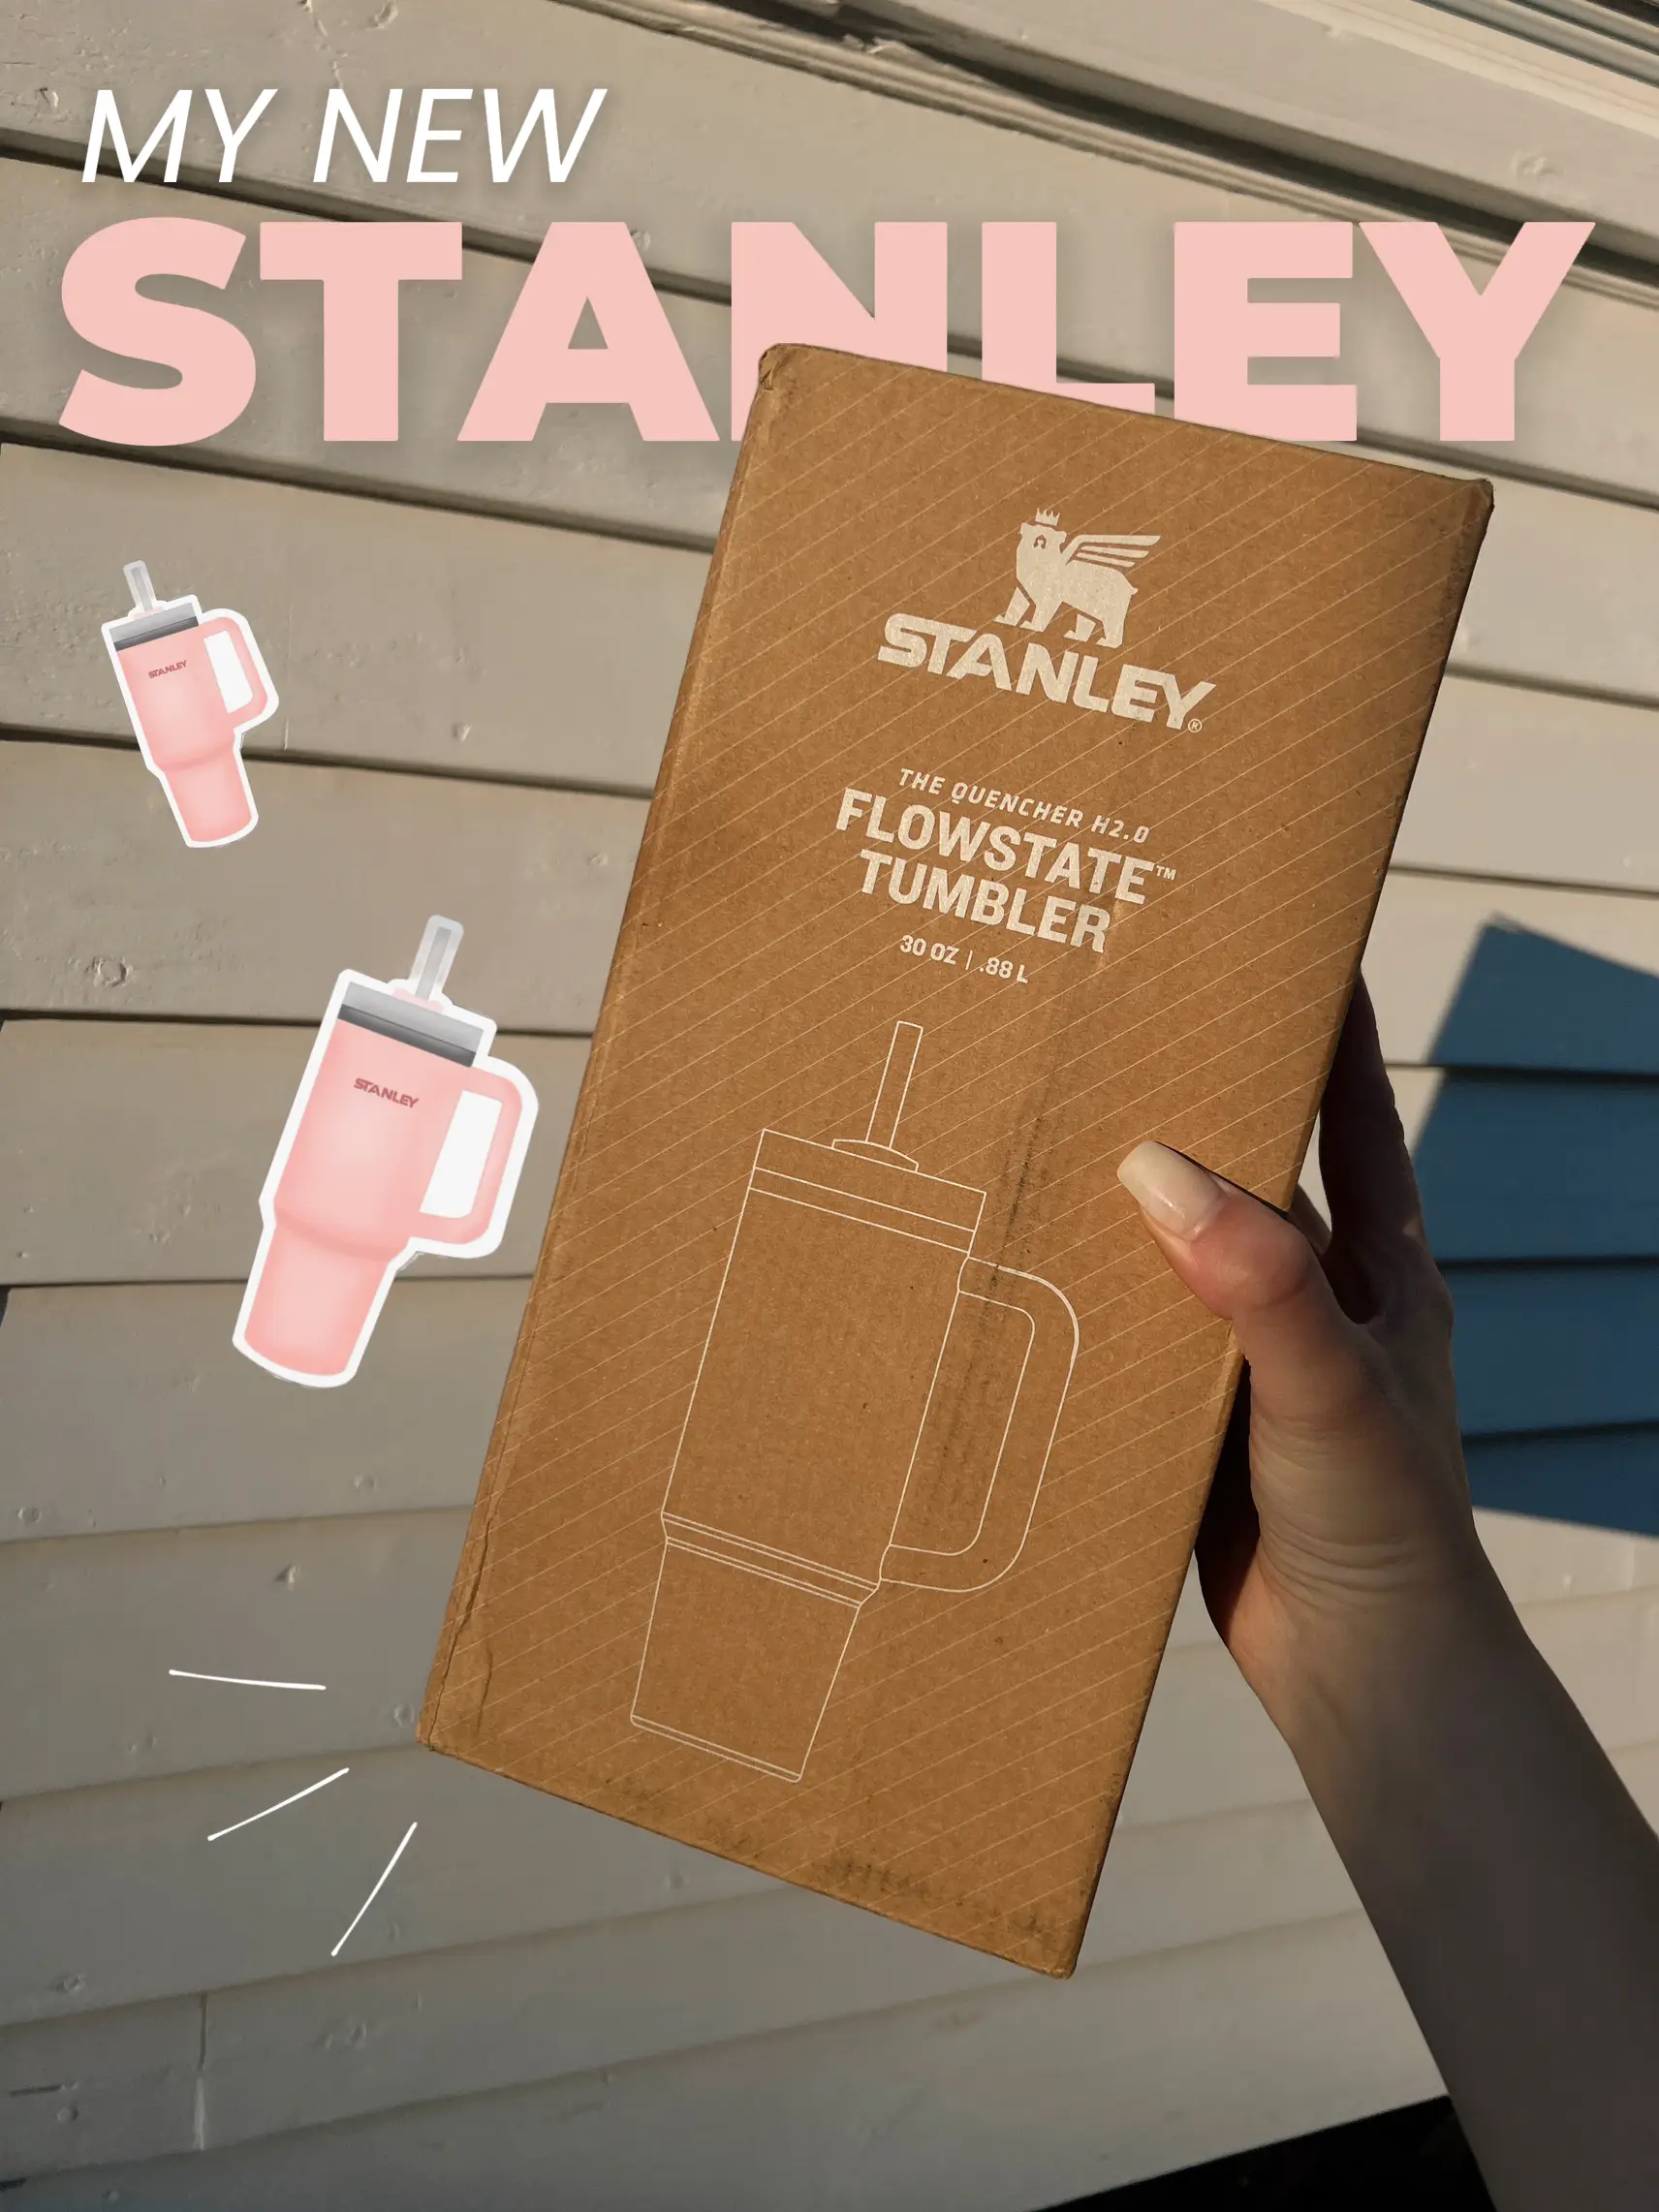 Brace Yourself for the New (Giant) Stanley Adventure Quencher The